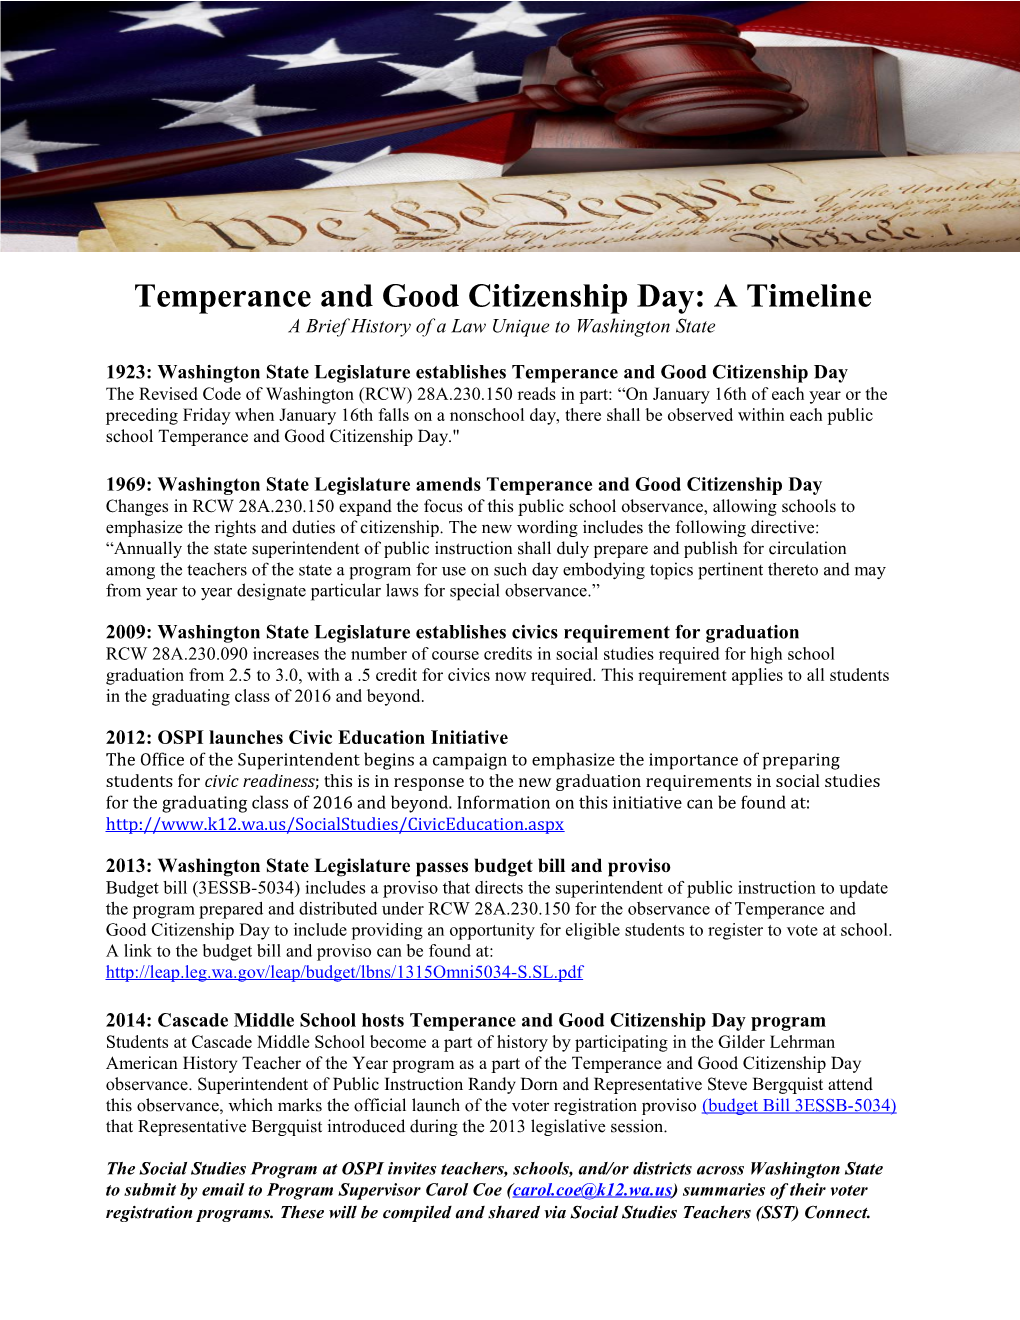 Temperance and Good Citizenship Day: a Timeline